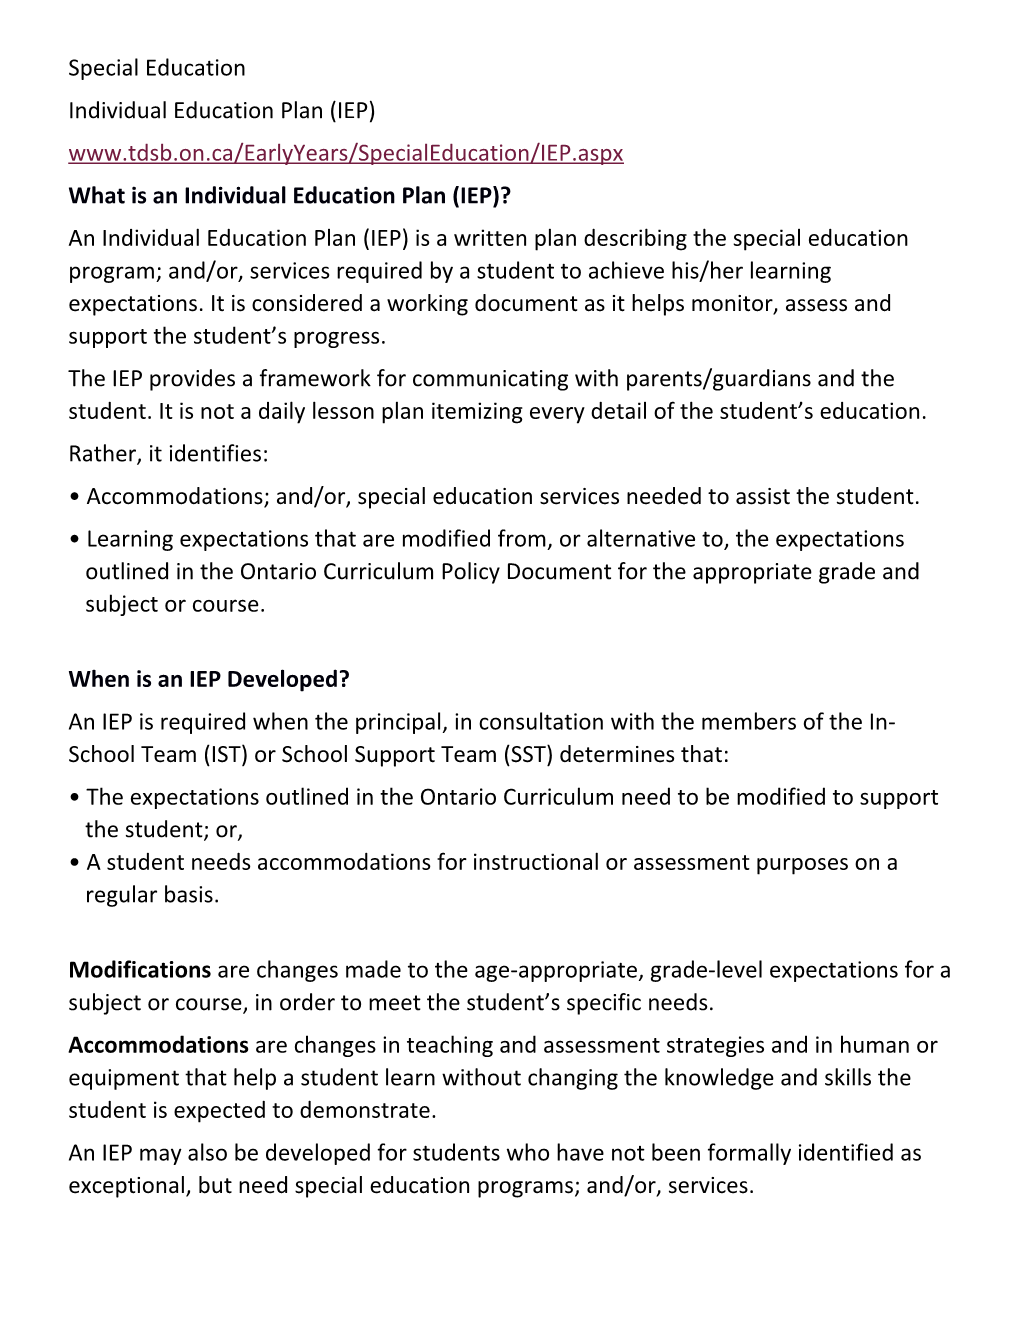 What Is an Individual Education Plan (IEP)?